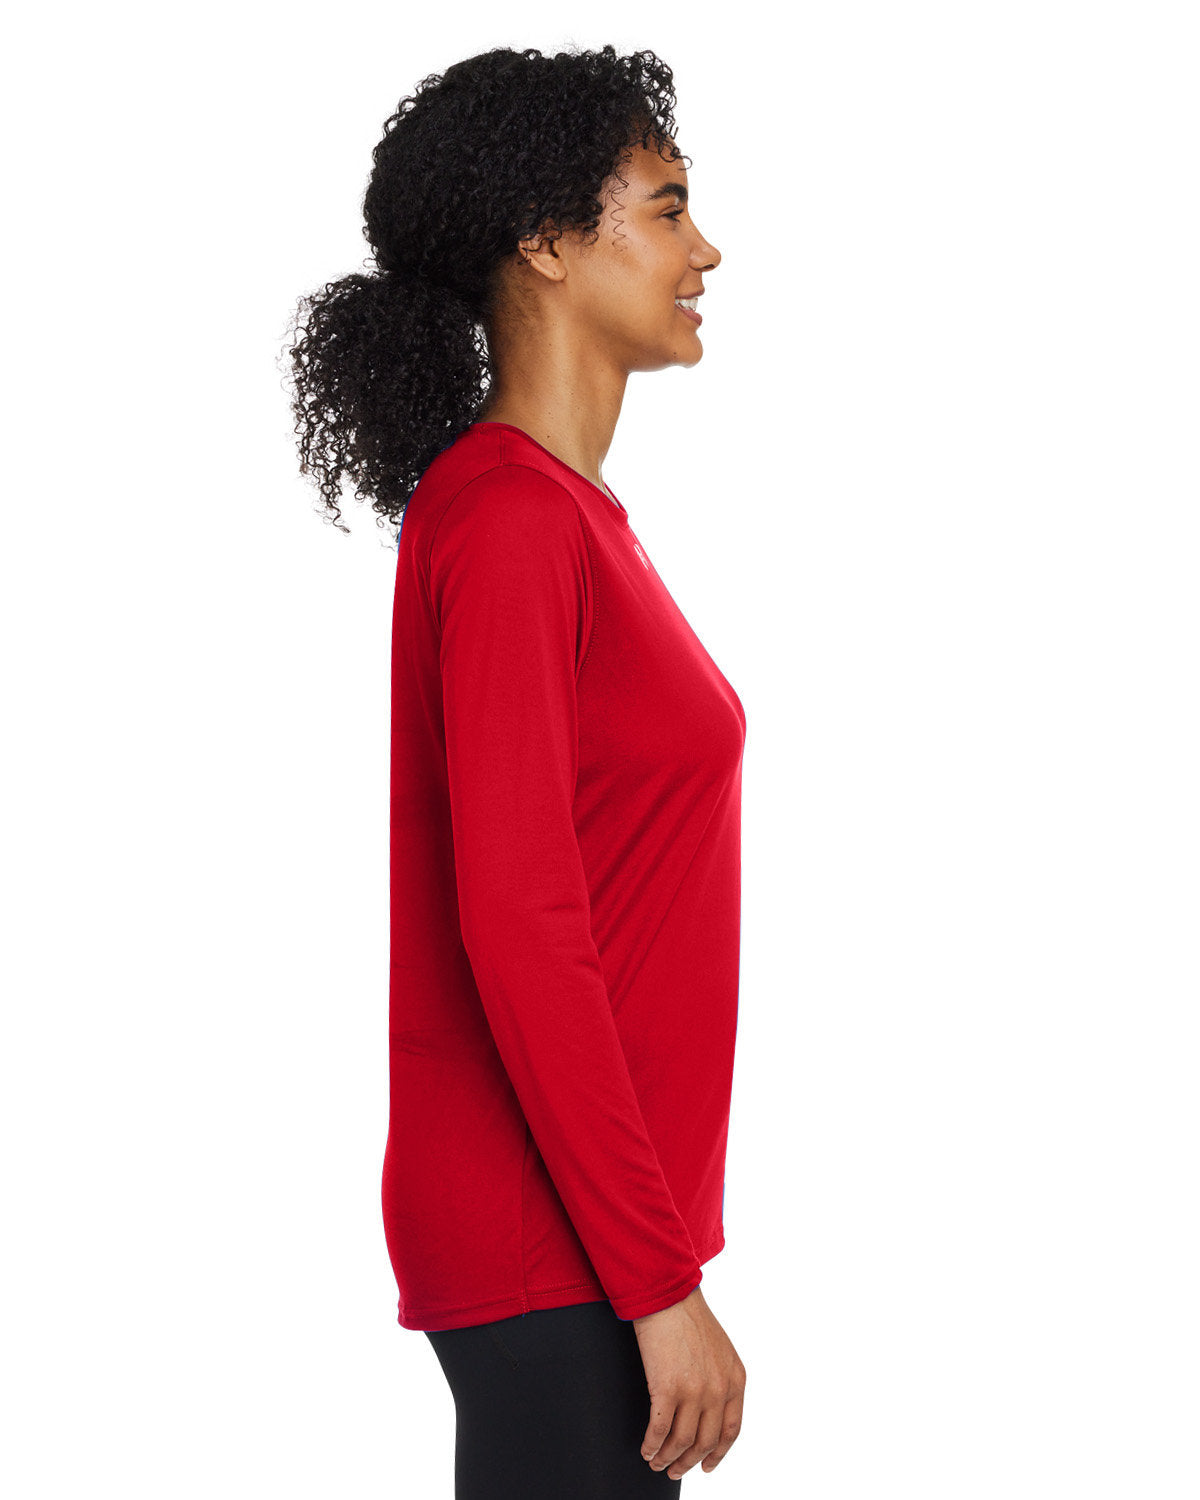 Under Armour Ladies Tech Long-Sleeve T-Shirt, Red